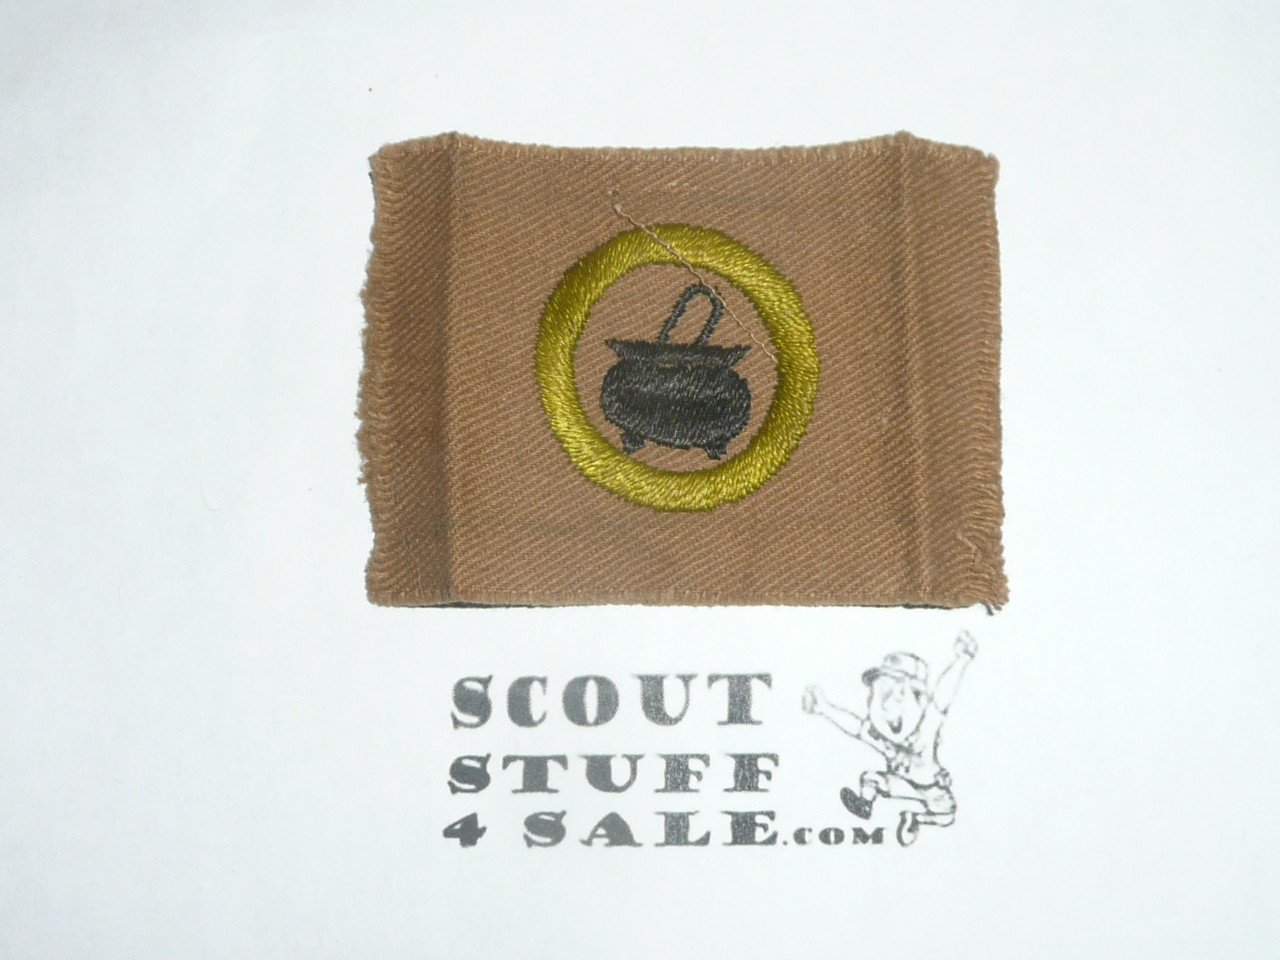 Cooking - Type A - Square Tan Merit Badge (1911-1933), oversized cloth, lite use